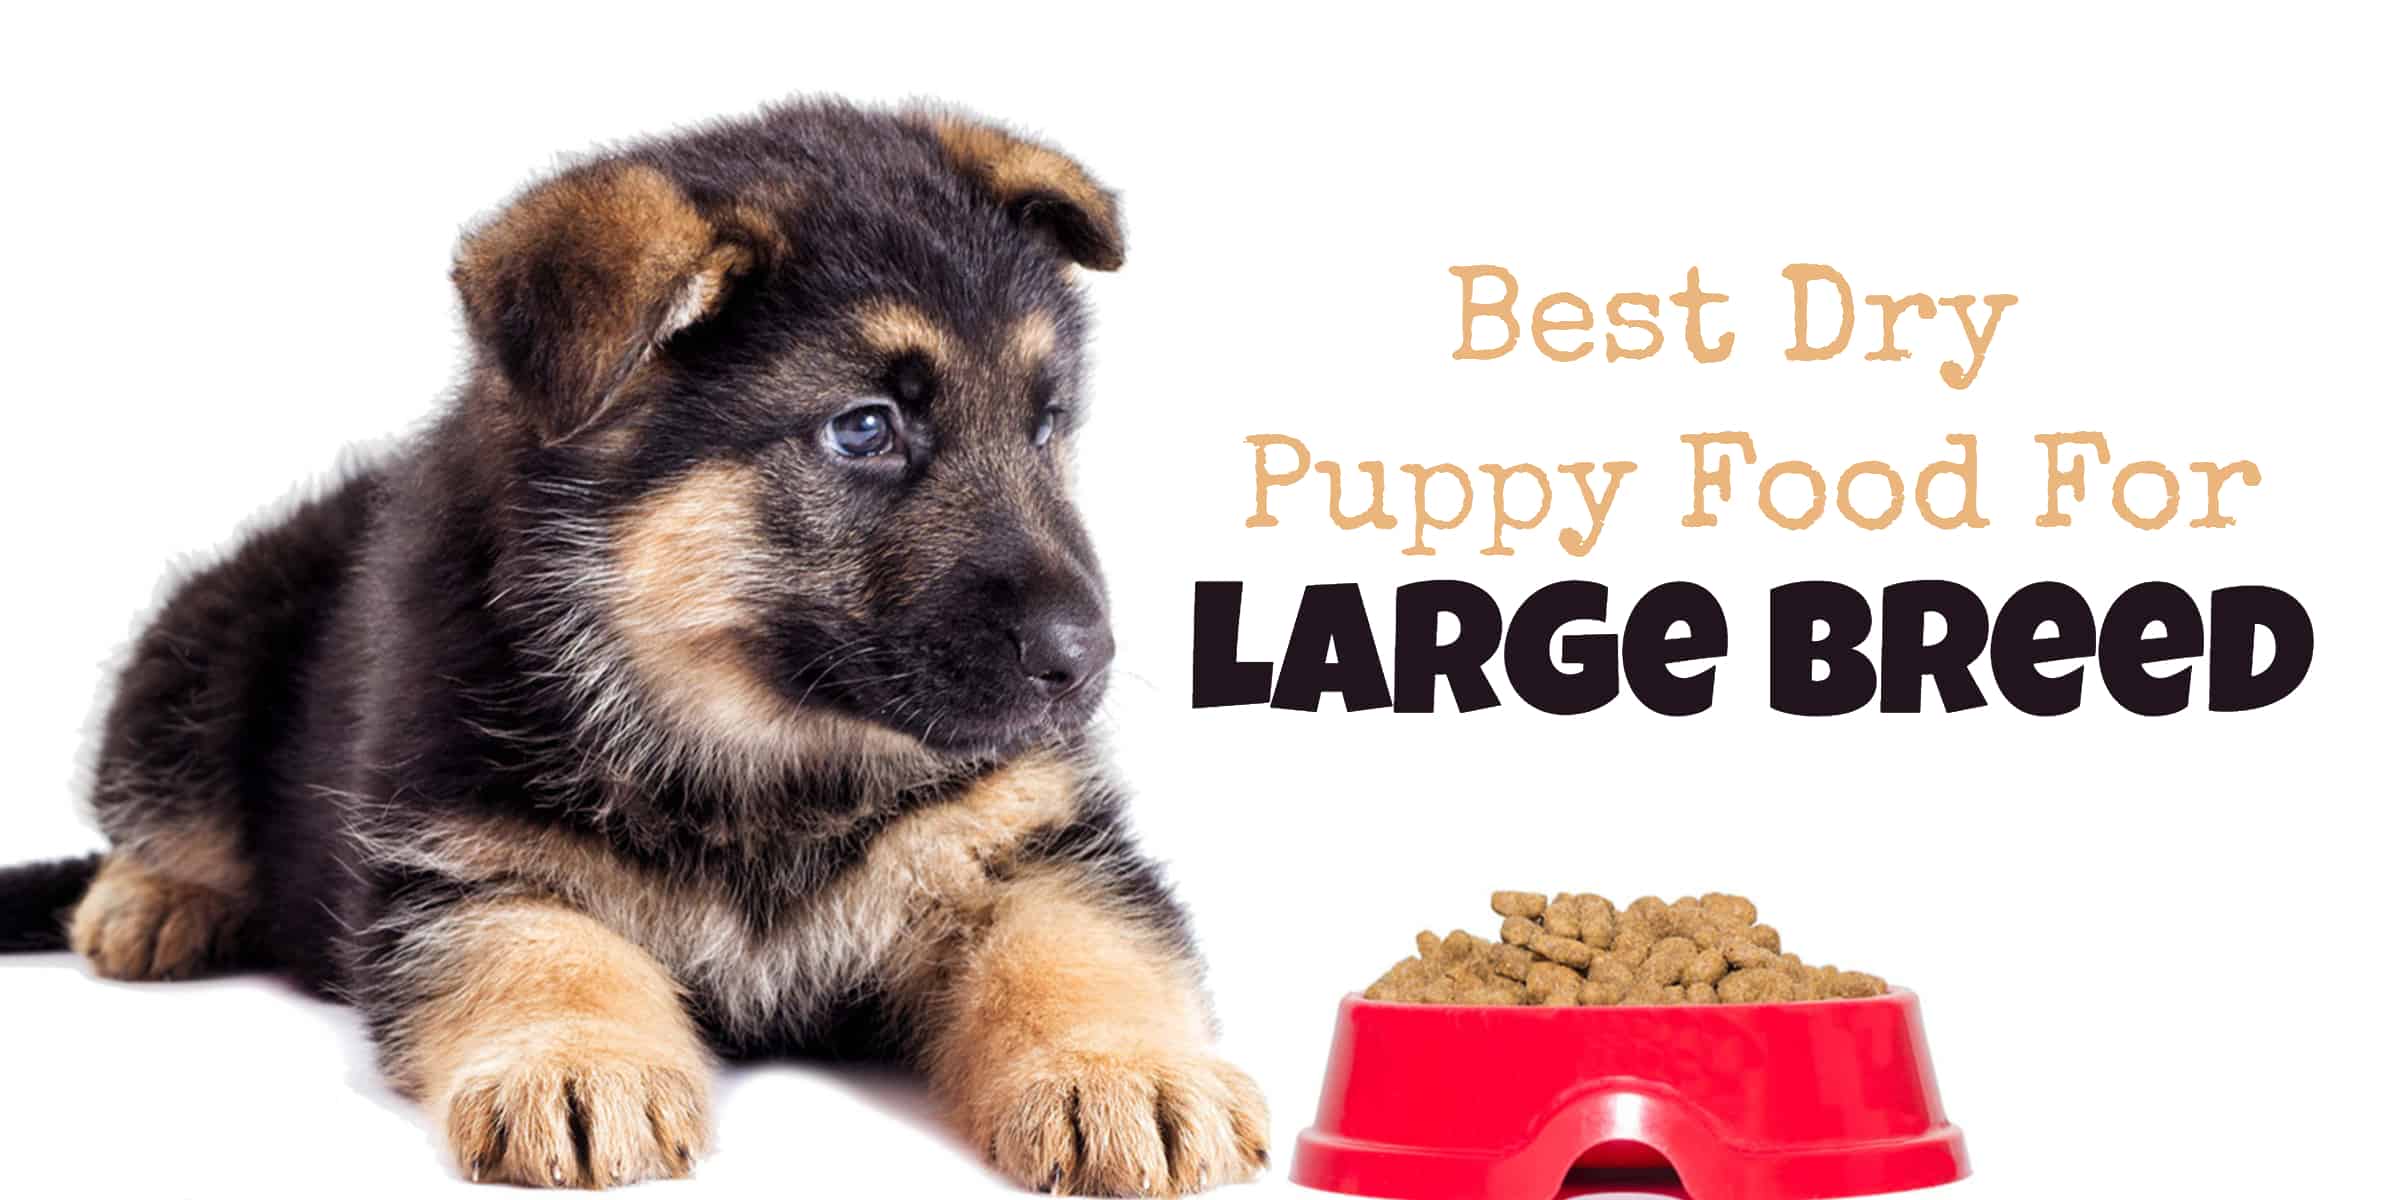 Best Dry Puppy Food For Large Breed www